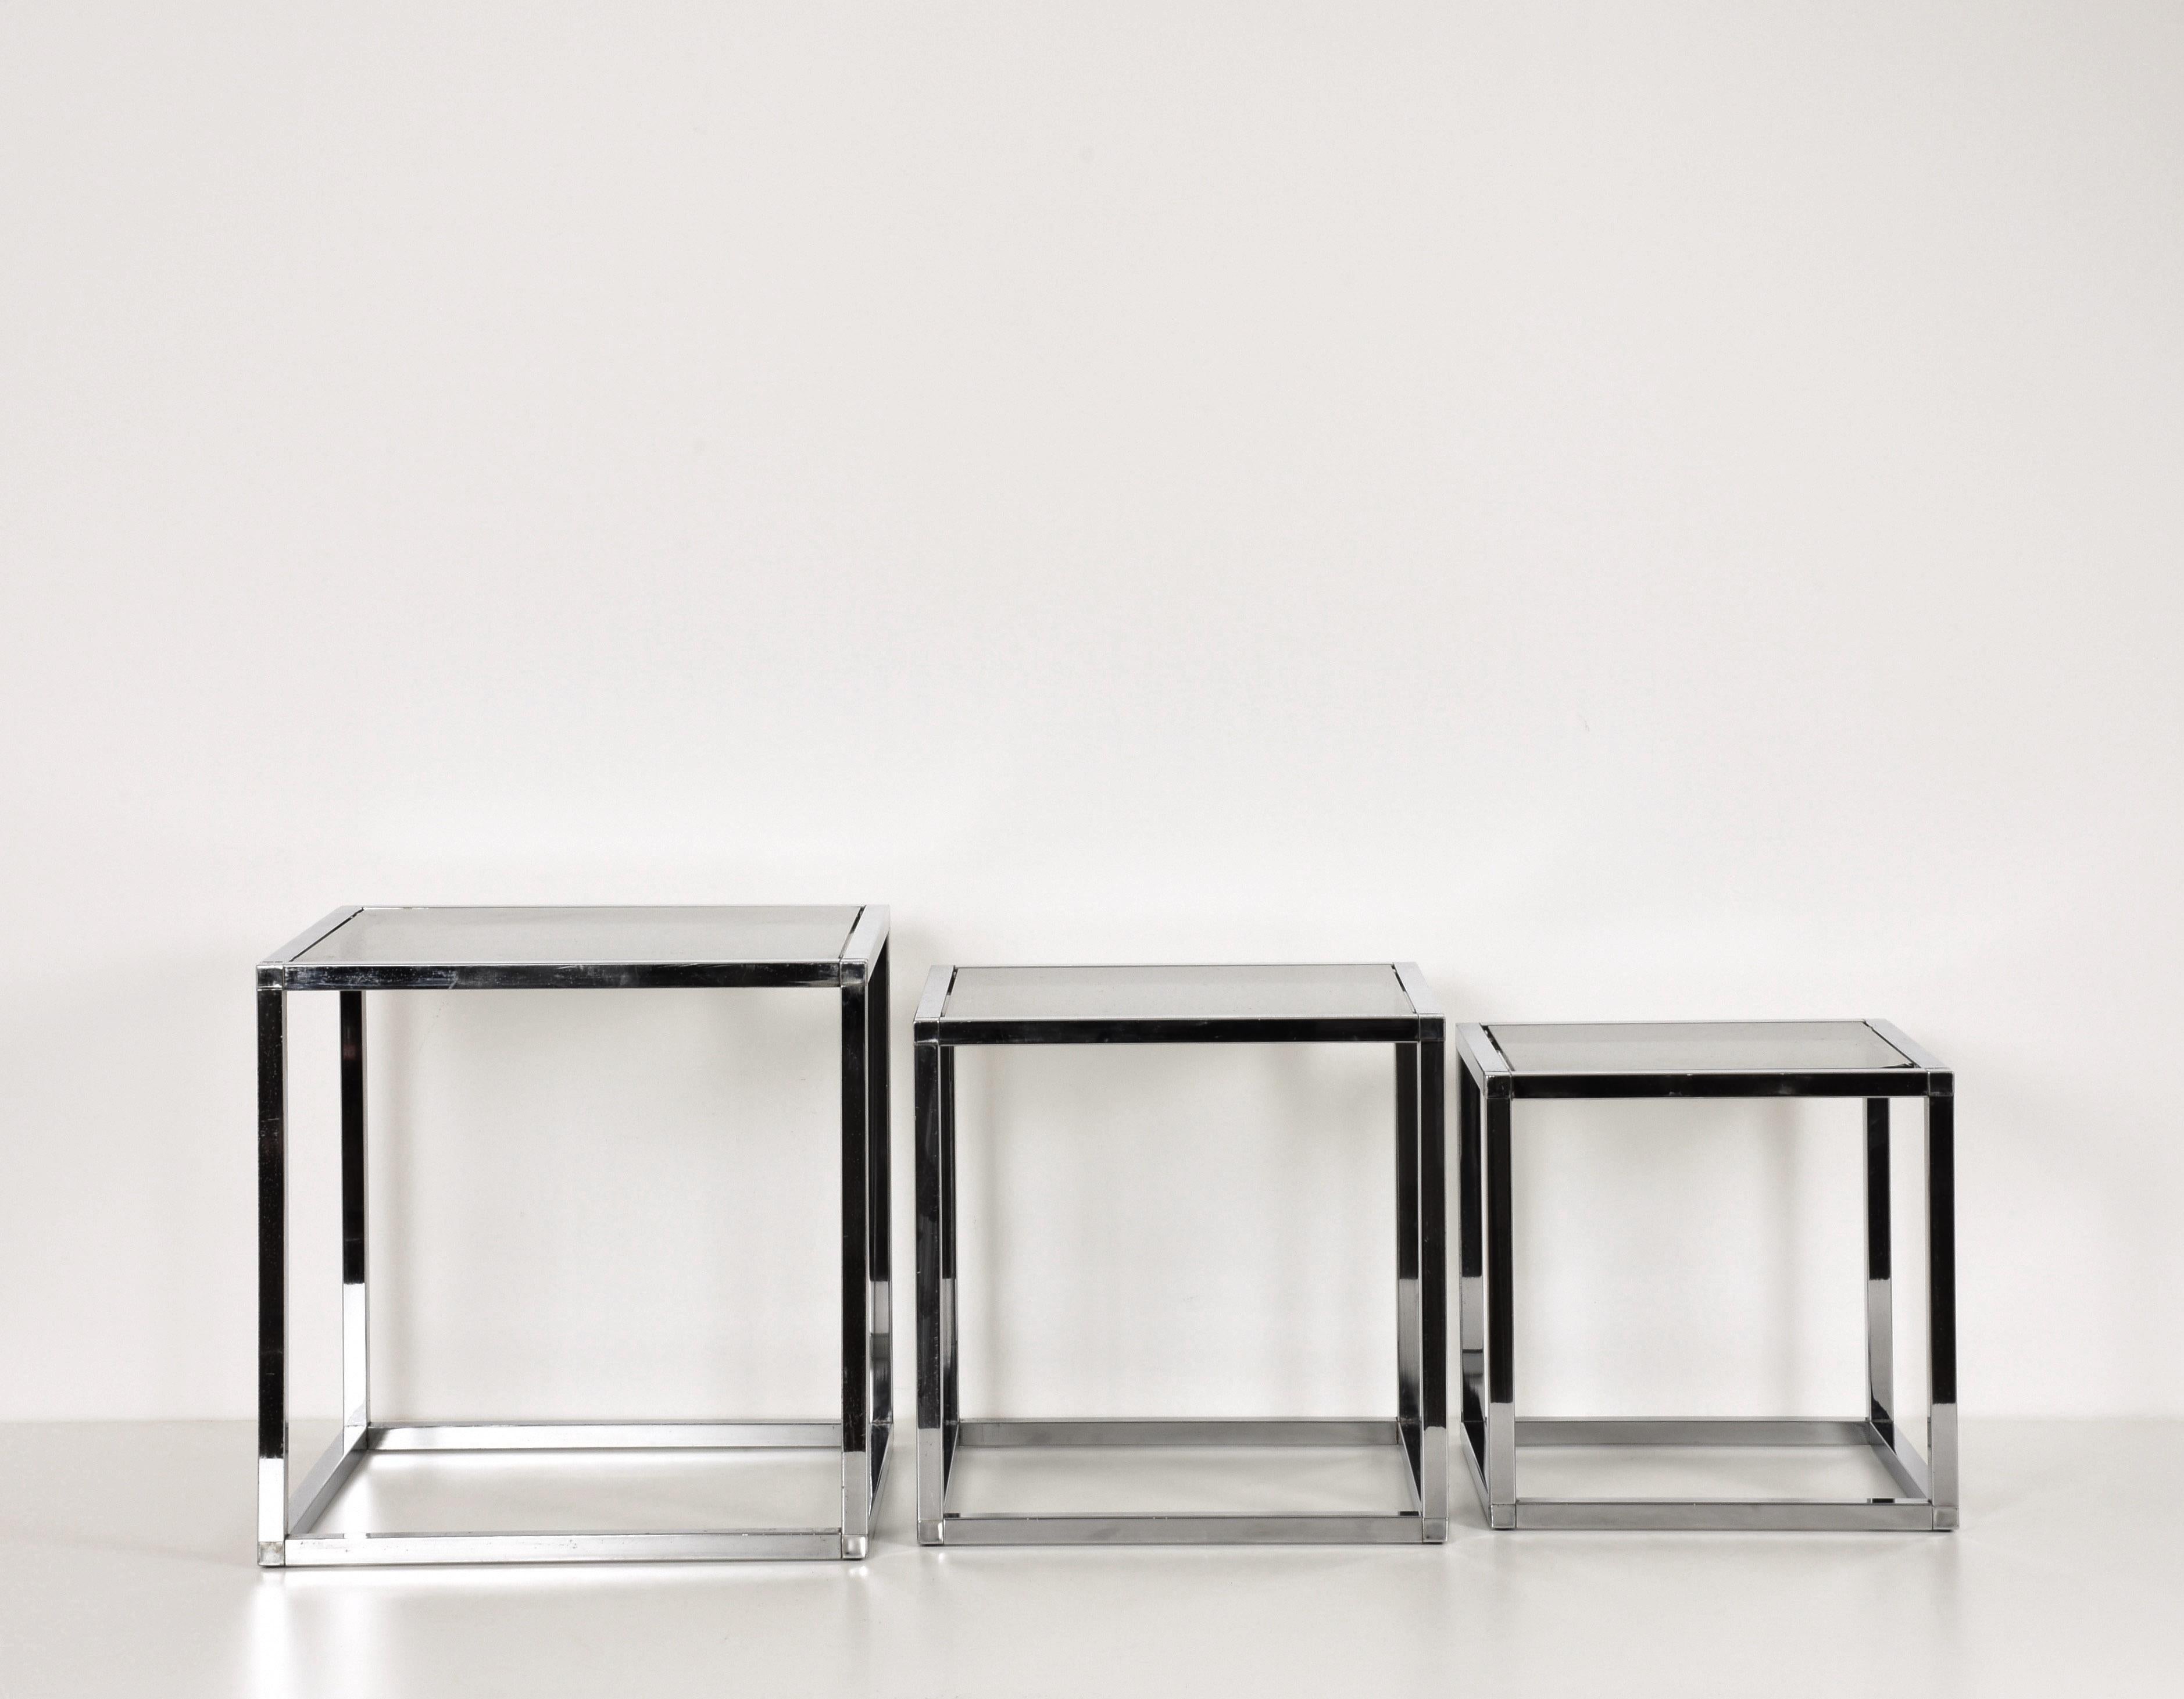 Crystal Set of Three Nesting Tables in Chrome and Glass, Italy, 1970s Mid-Century Modern